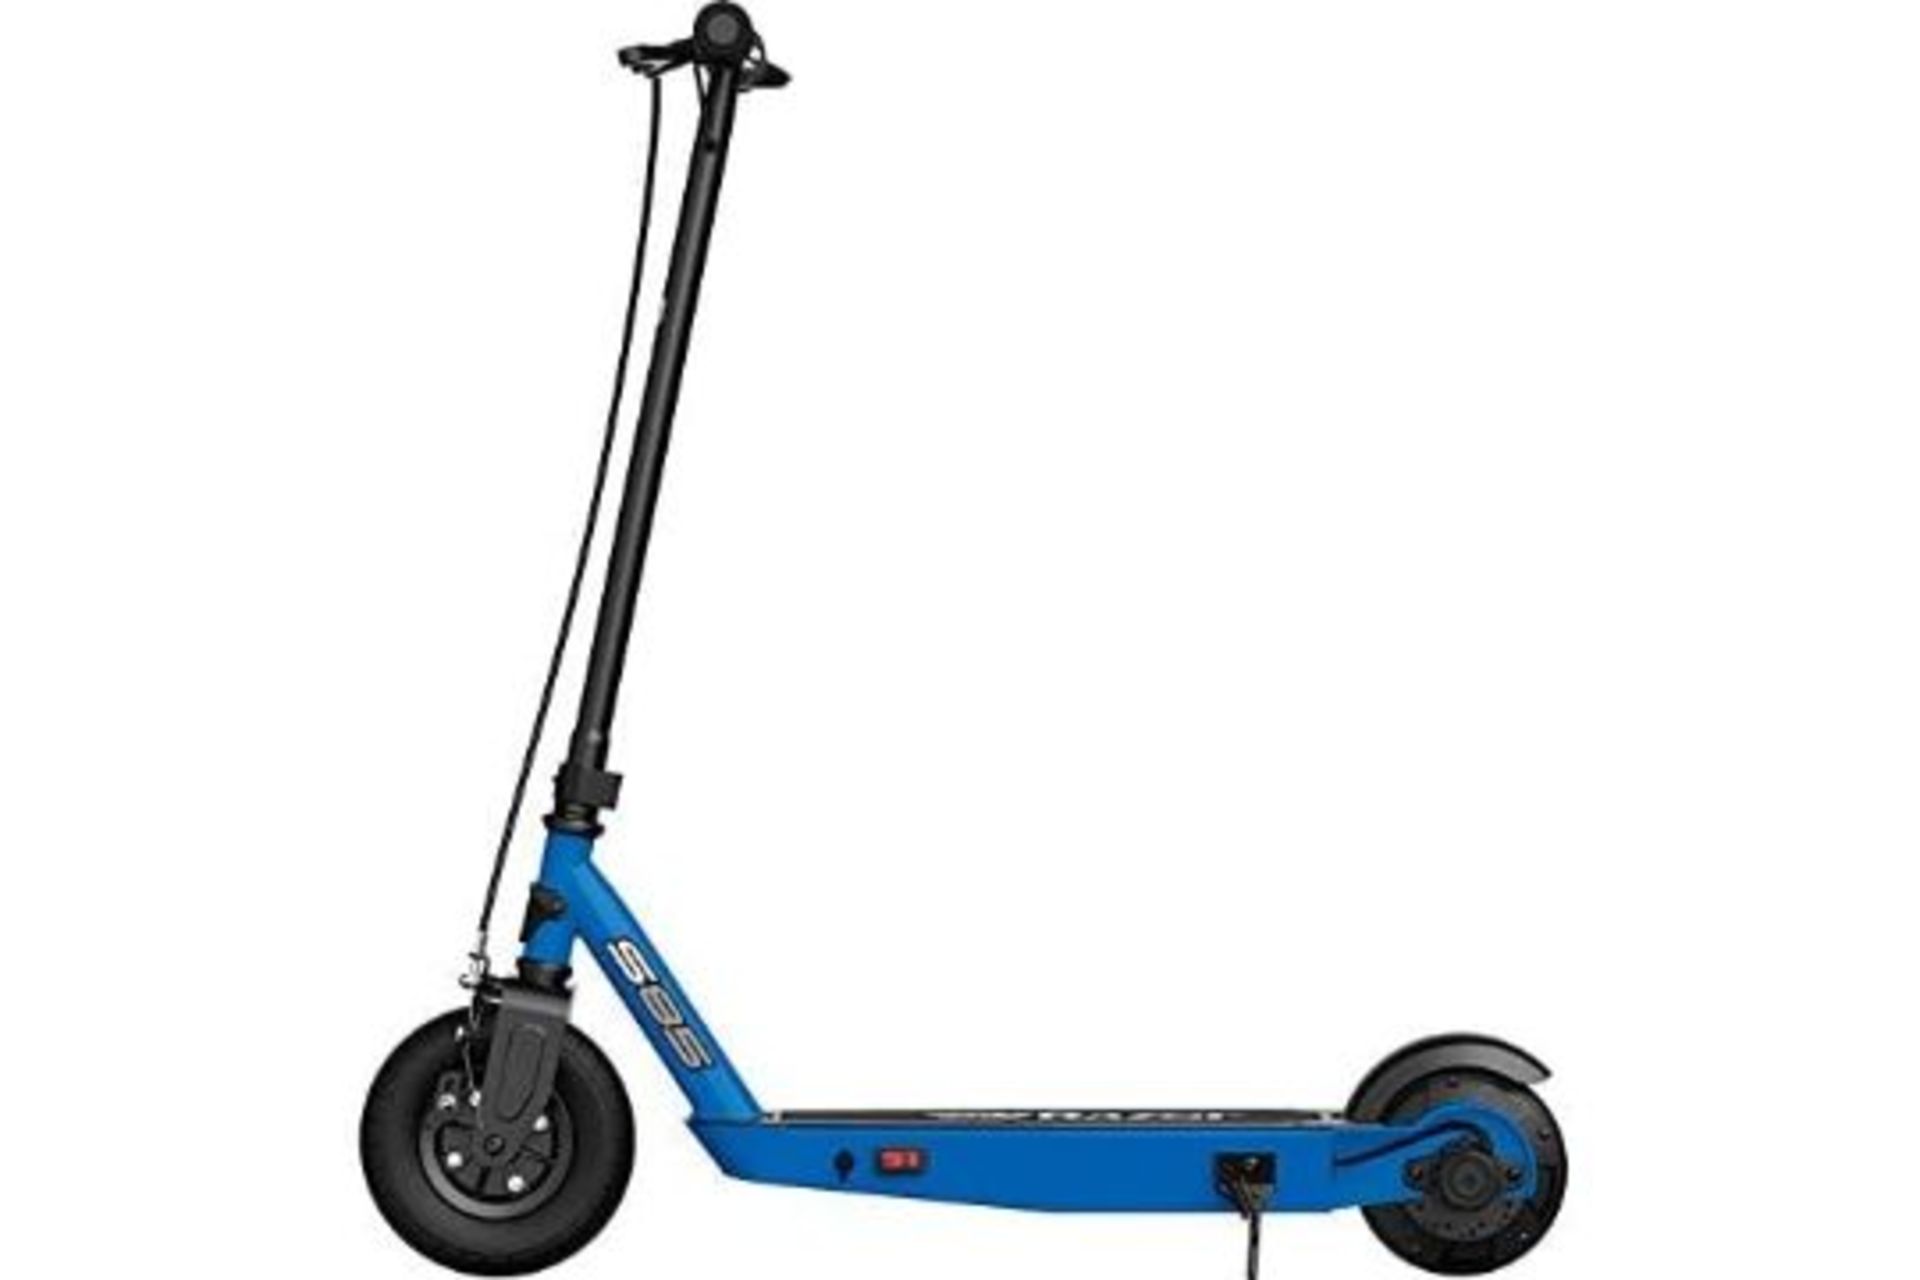 Razor Power Core S85 Electric Scooter. RRP £250.00. Powered by PowerCore –Innovative Power Core